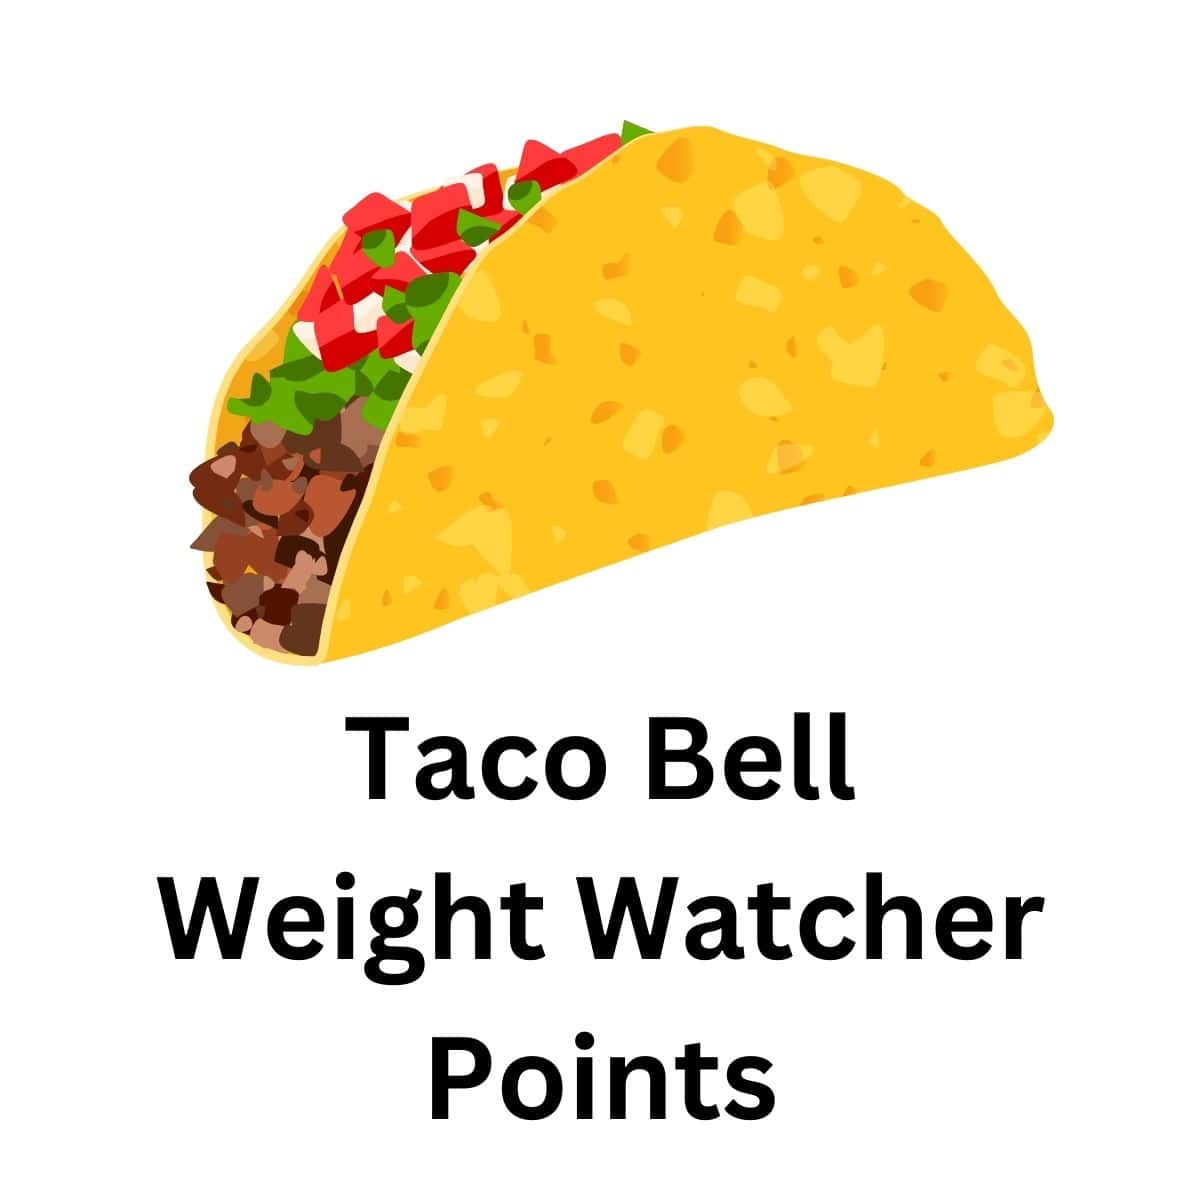 Taco Bell offers a variety of menu items that can fit into a Weight Watchers plan. The key is to look for items that are lower in WW points, which are calculated based on calories, saturated fat, sugar, and protein content